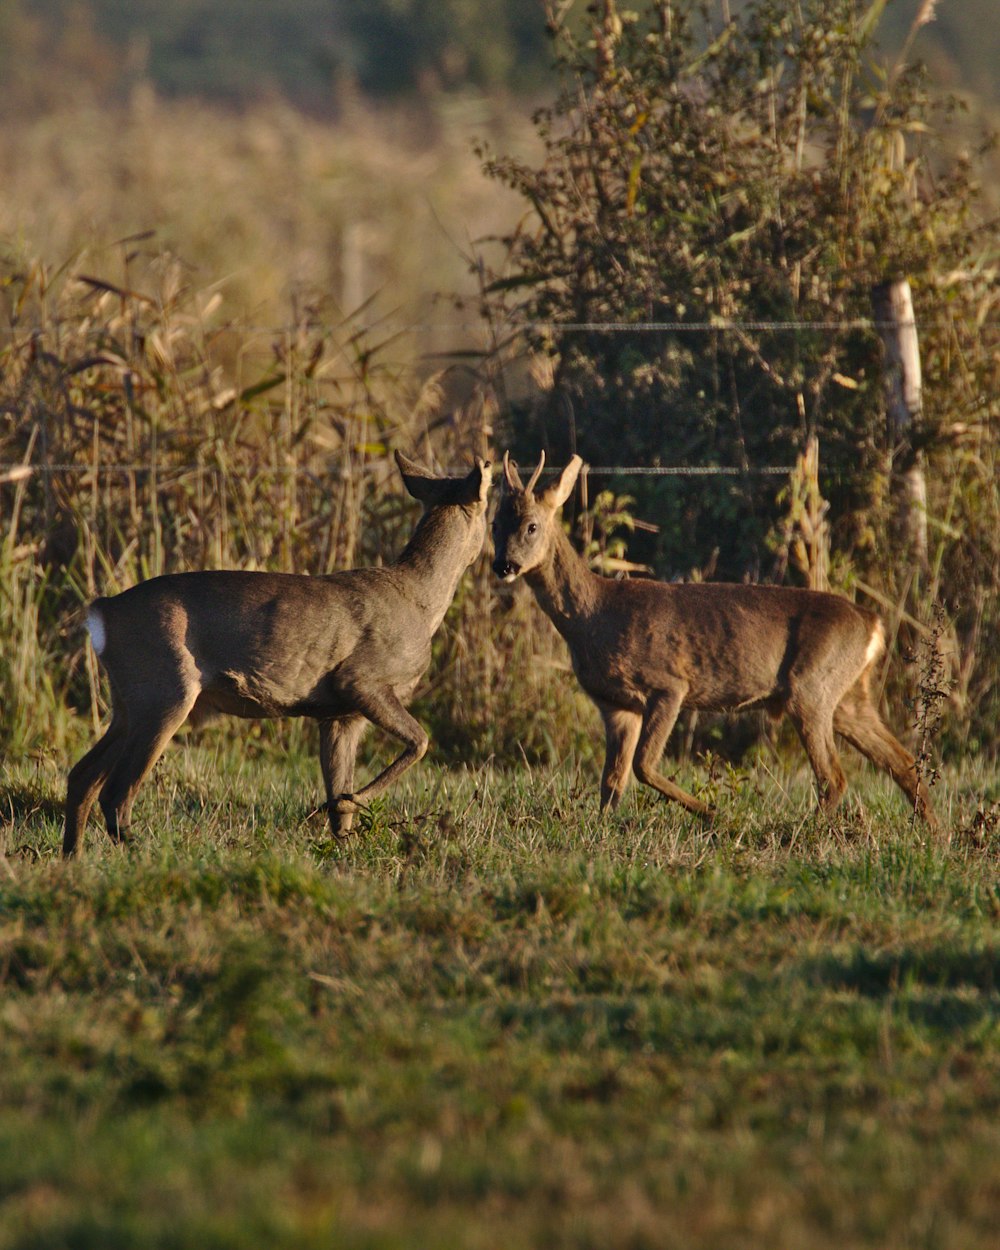 two gray deers by fence during daytime